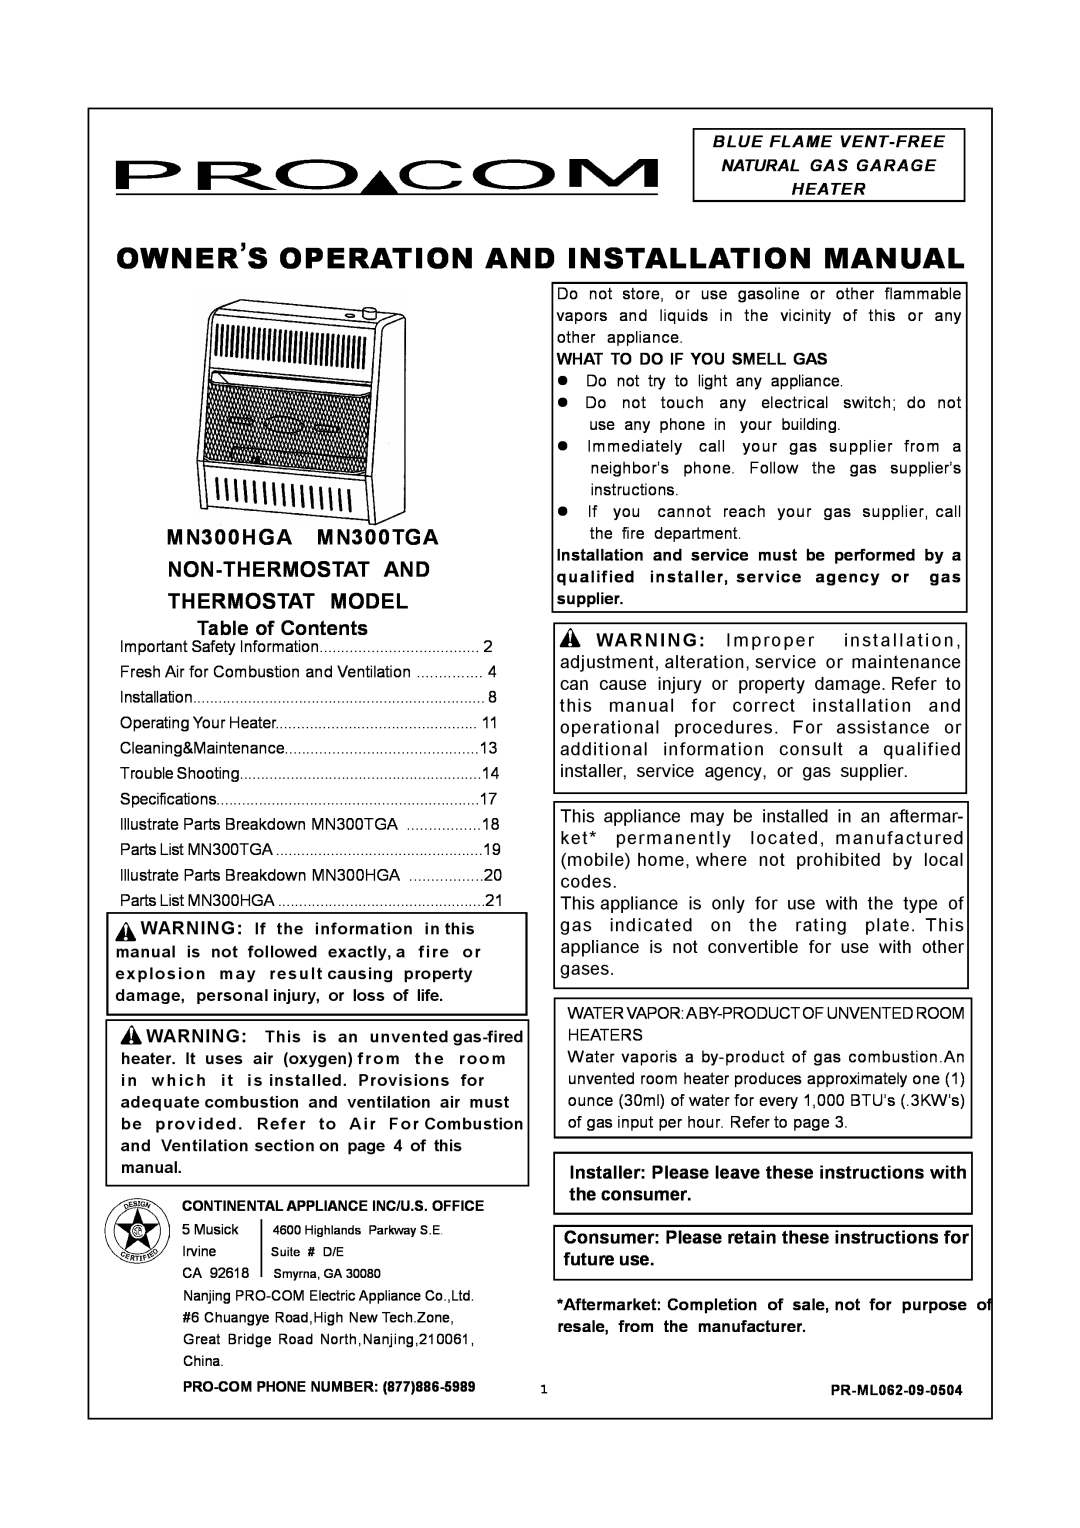 PYLE Audio installation manual MN300HGA MN300TGA, Non-Thermostatand, Thermostat Model, Table of Contents 